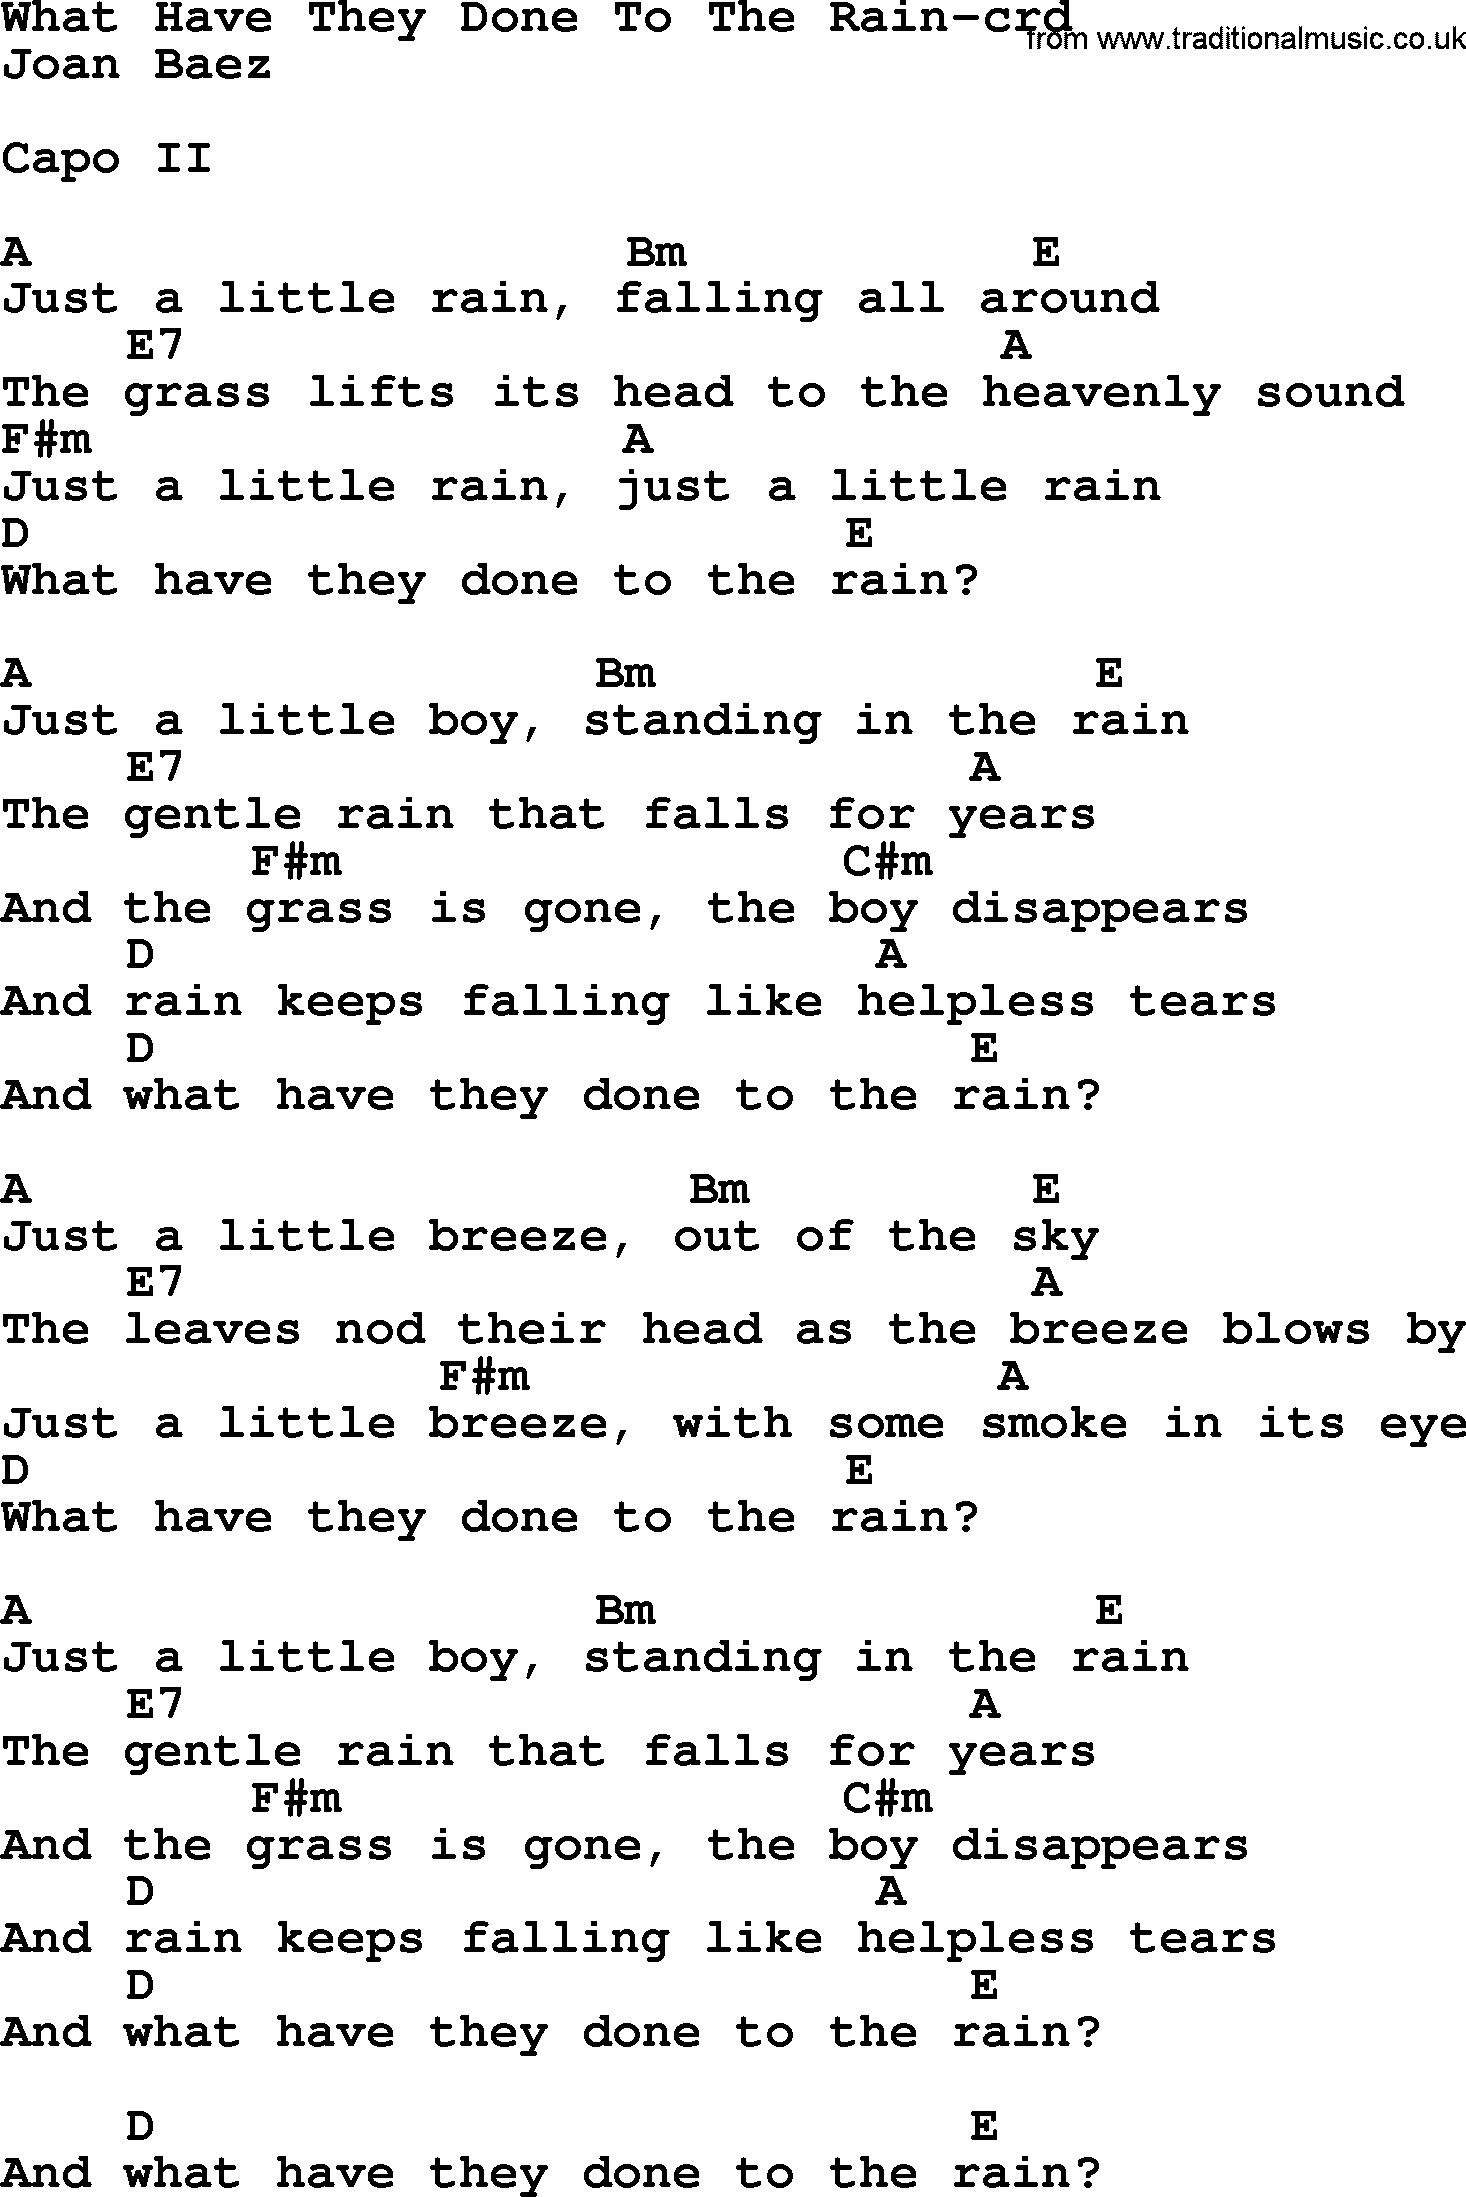 Joan Baez song What Have They Done To The Rain lyrics and chords